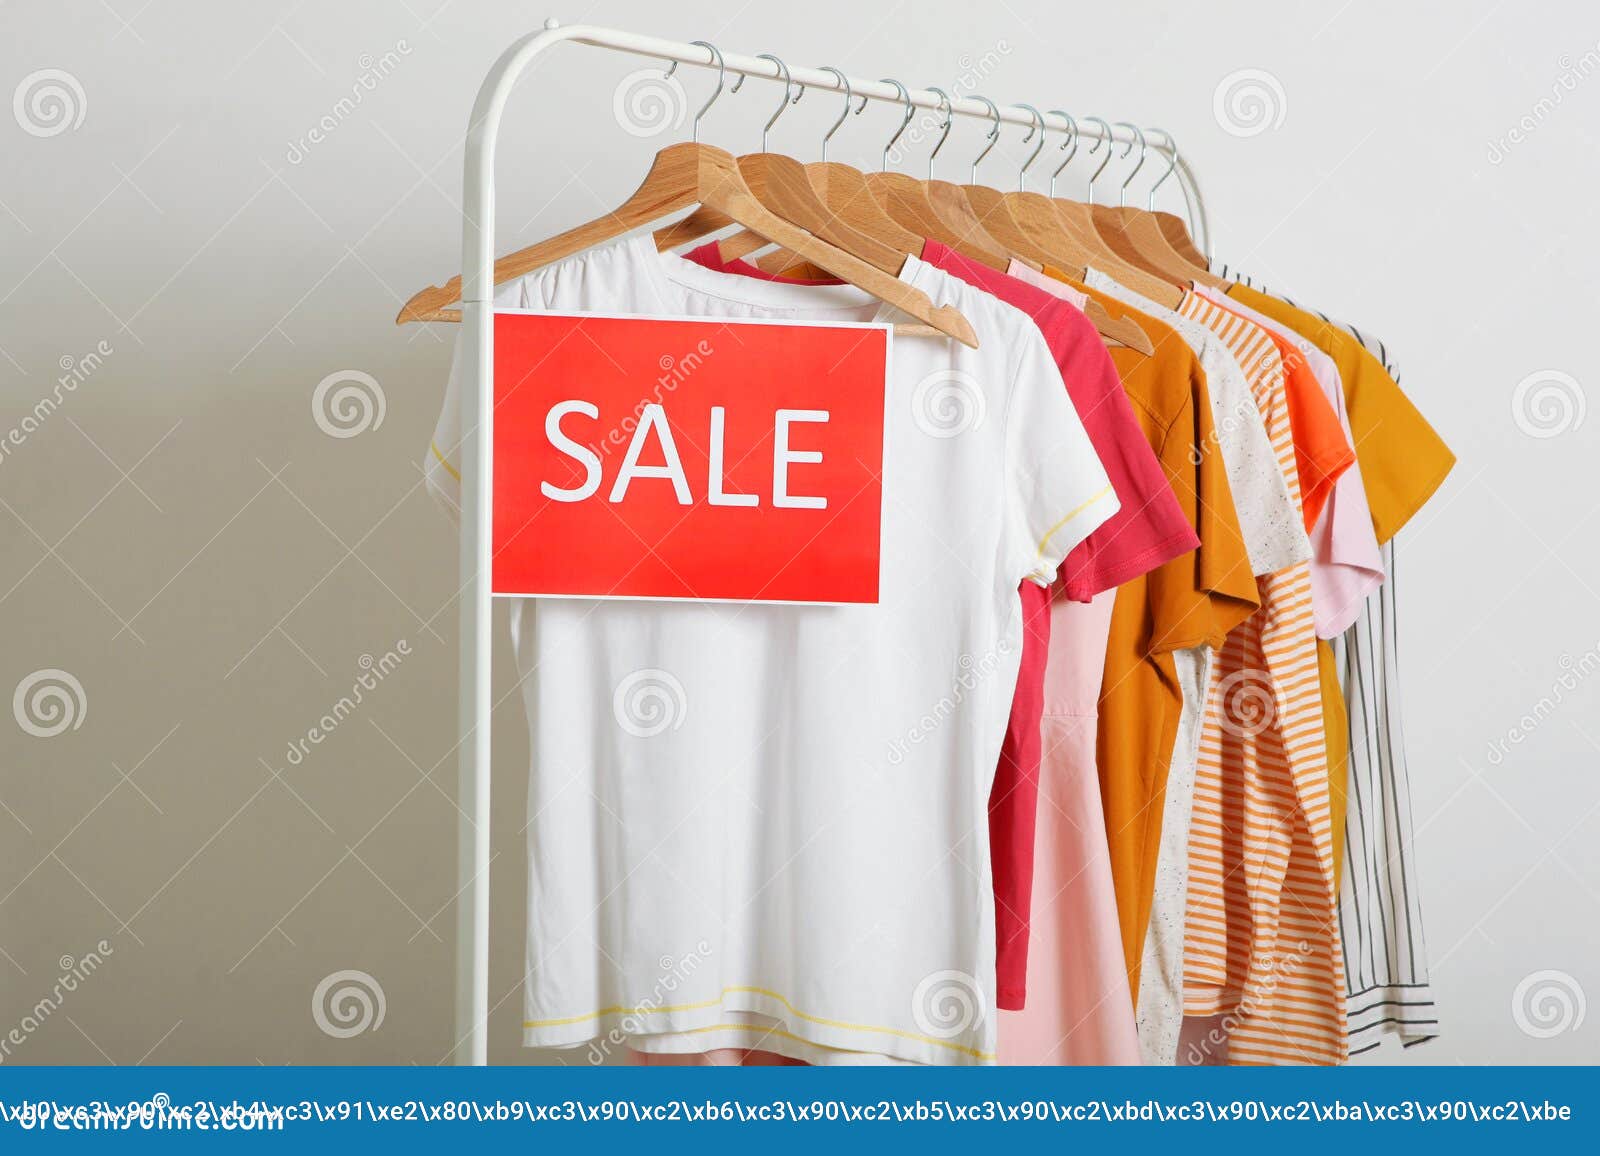 Smiling Young Woman Clothing Store Clearance Day Stock Photo by